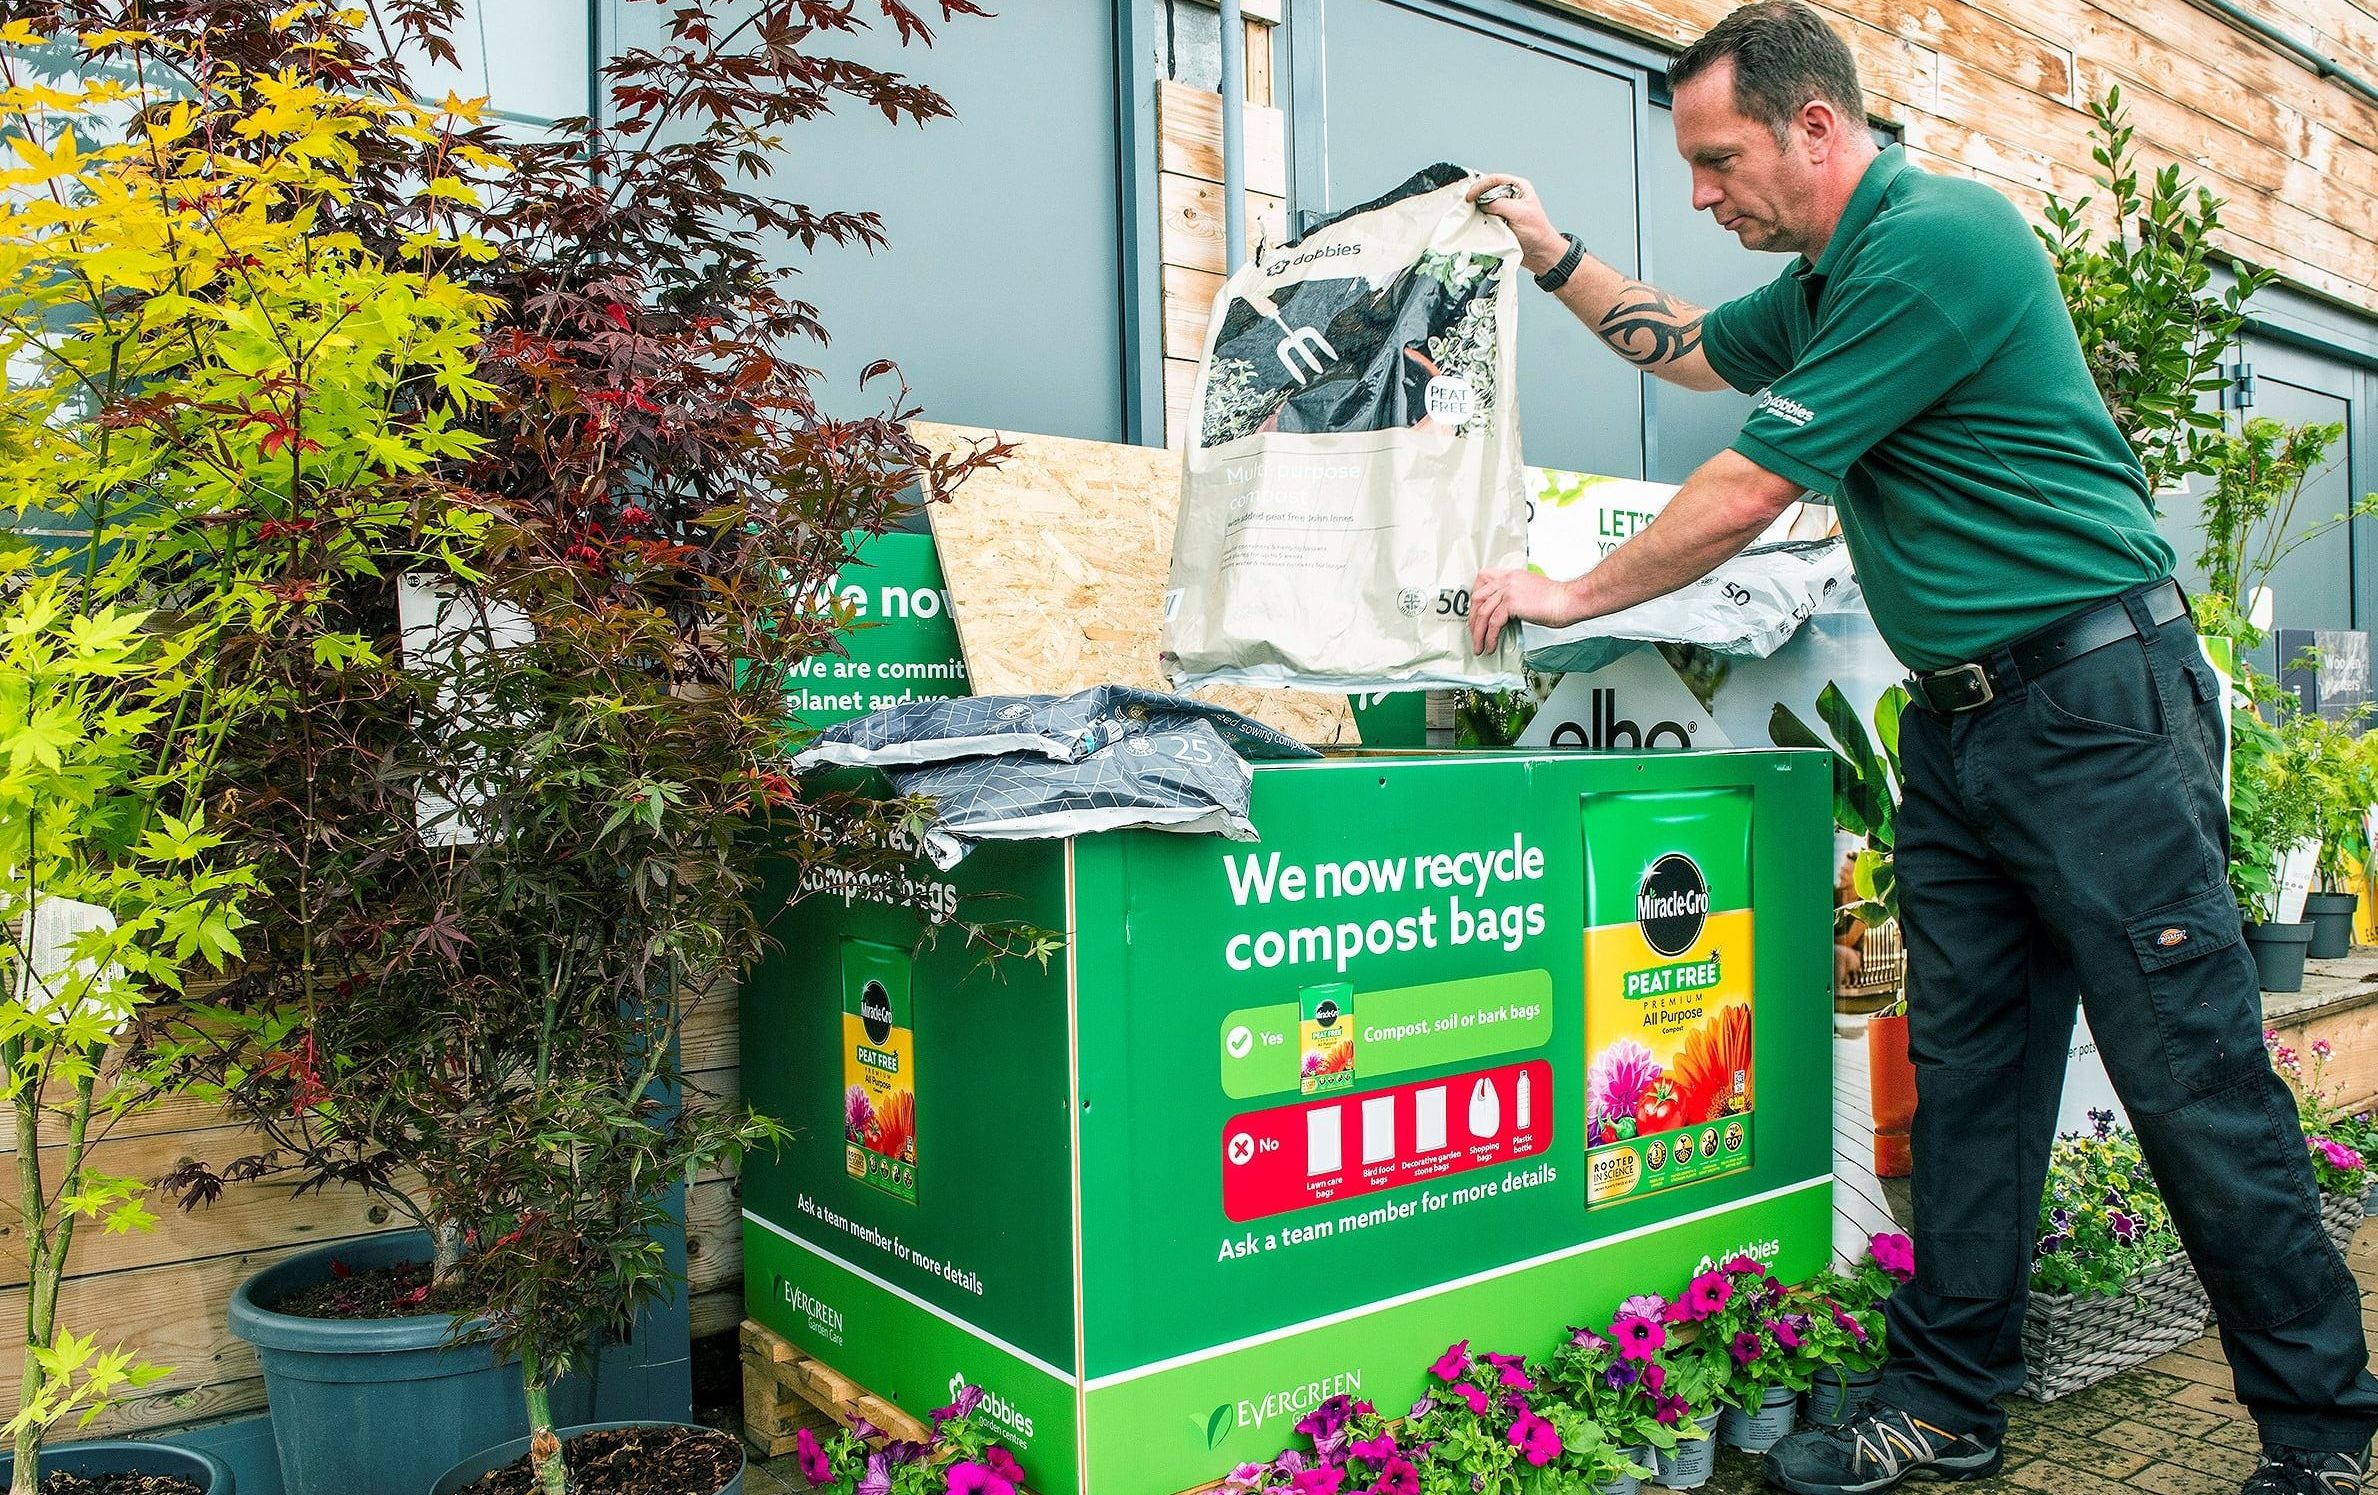 Gardeners Can Now Recycle Compost Bags